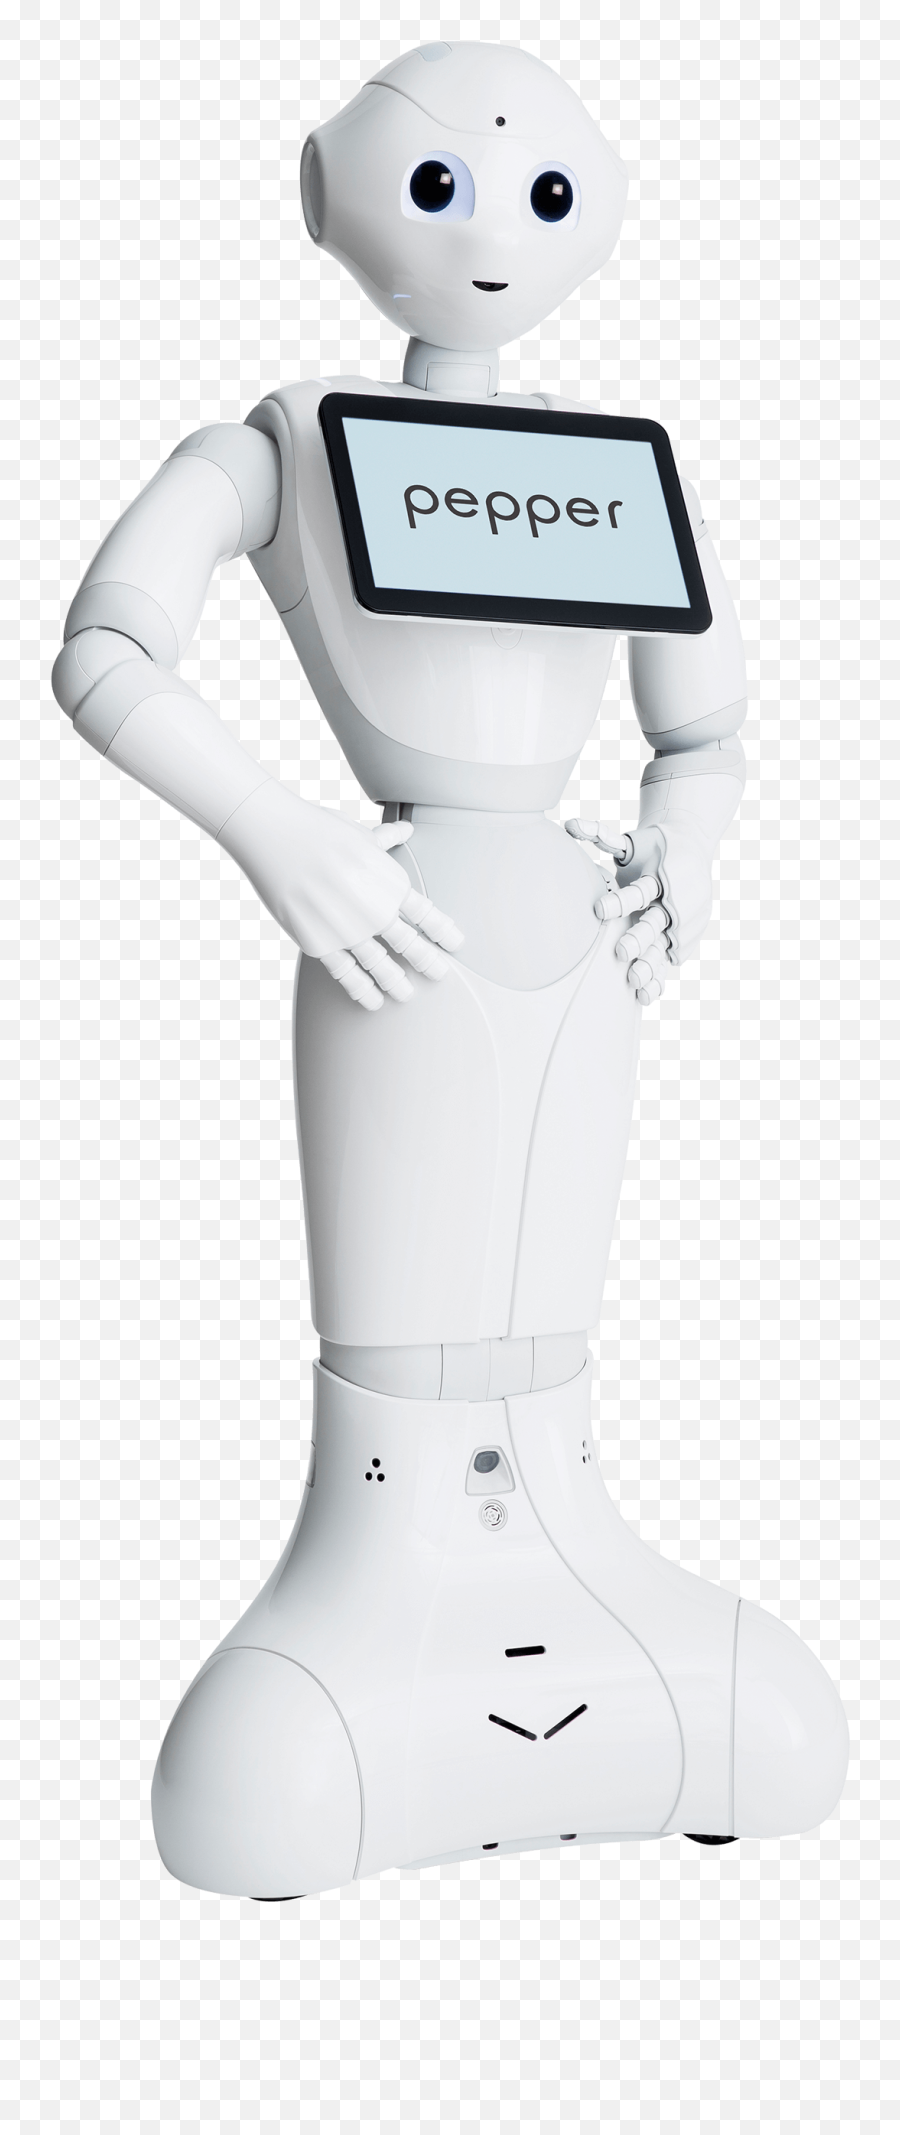 Pepper The Humanoid And Programmable - Pepper Emoji,Robots With Emotions